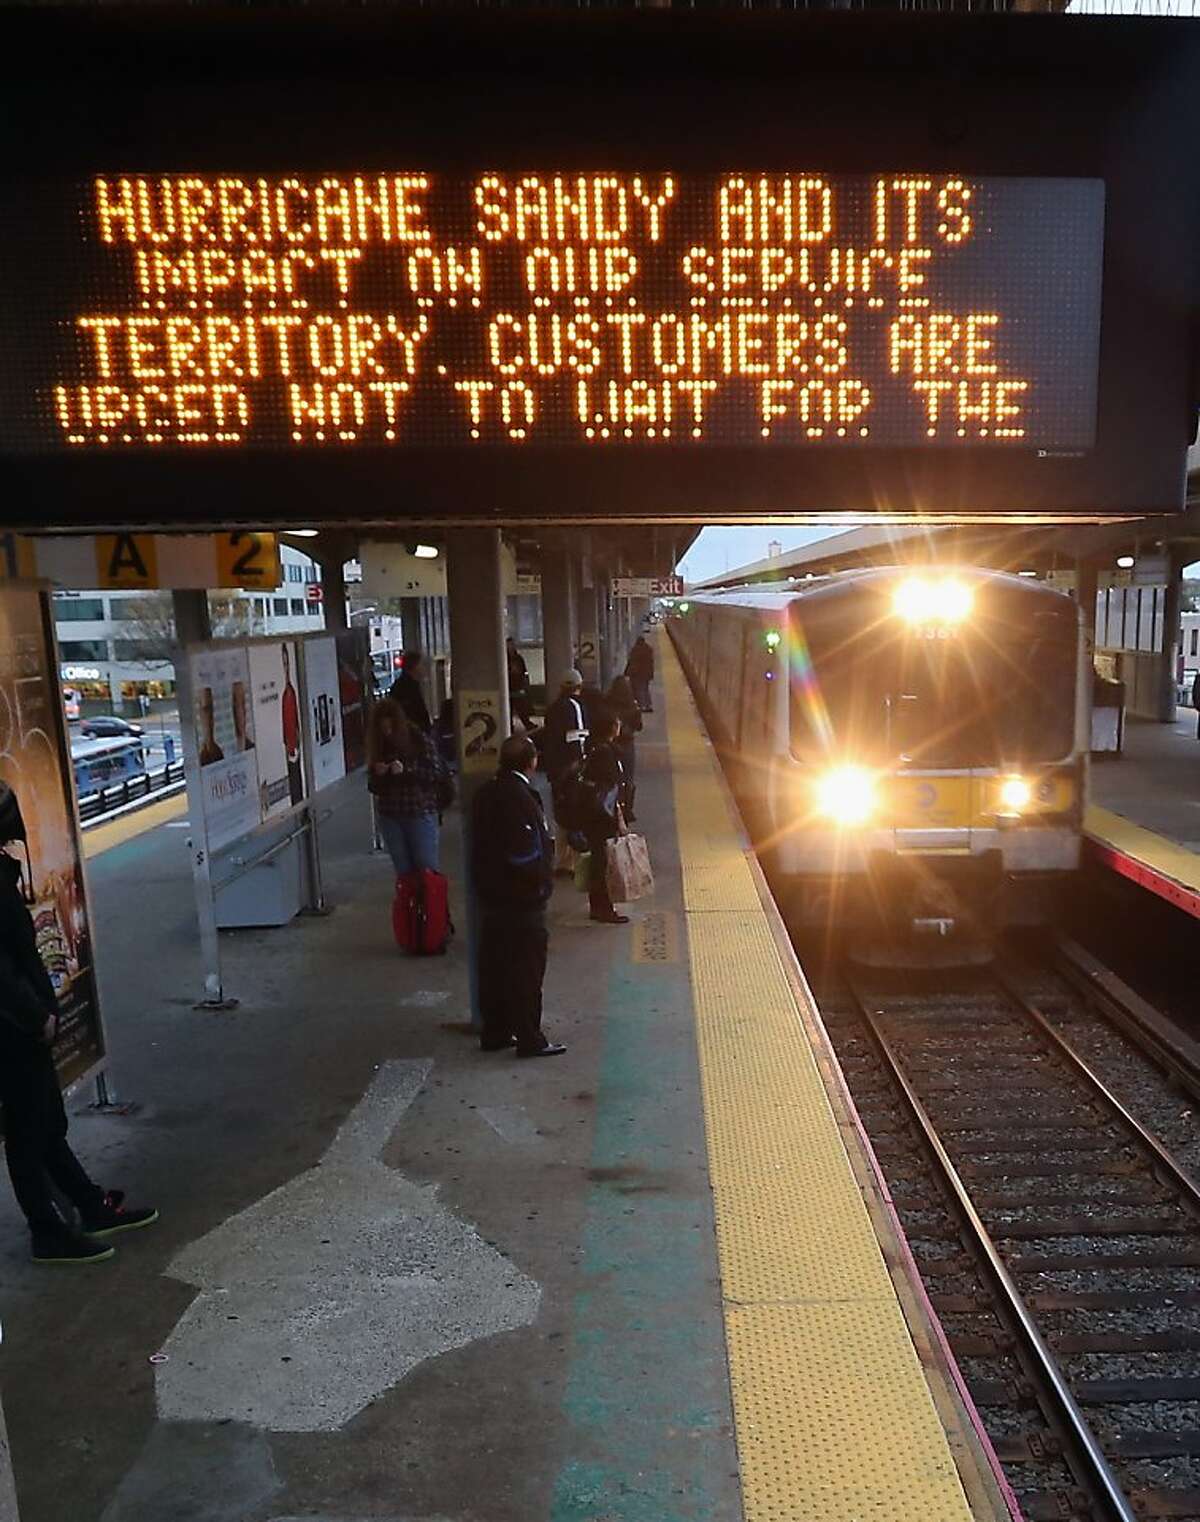 HICKSVILLE, NY - OCTOBER 28: With Hurricane Sandy approaching, the Long Island Railroad announced the suspension of their service at 7pm on Sunday night, October 28, 2012 in Hicksville, New York. Sandy, which has already claimed over 50 lives in the Caribbean is predicted to bring heavy winds and floodwaters as the mid-atlantic region prepares for the damage. (Photo by Bruce Bennett/Getty Images)